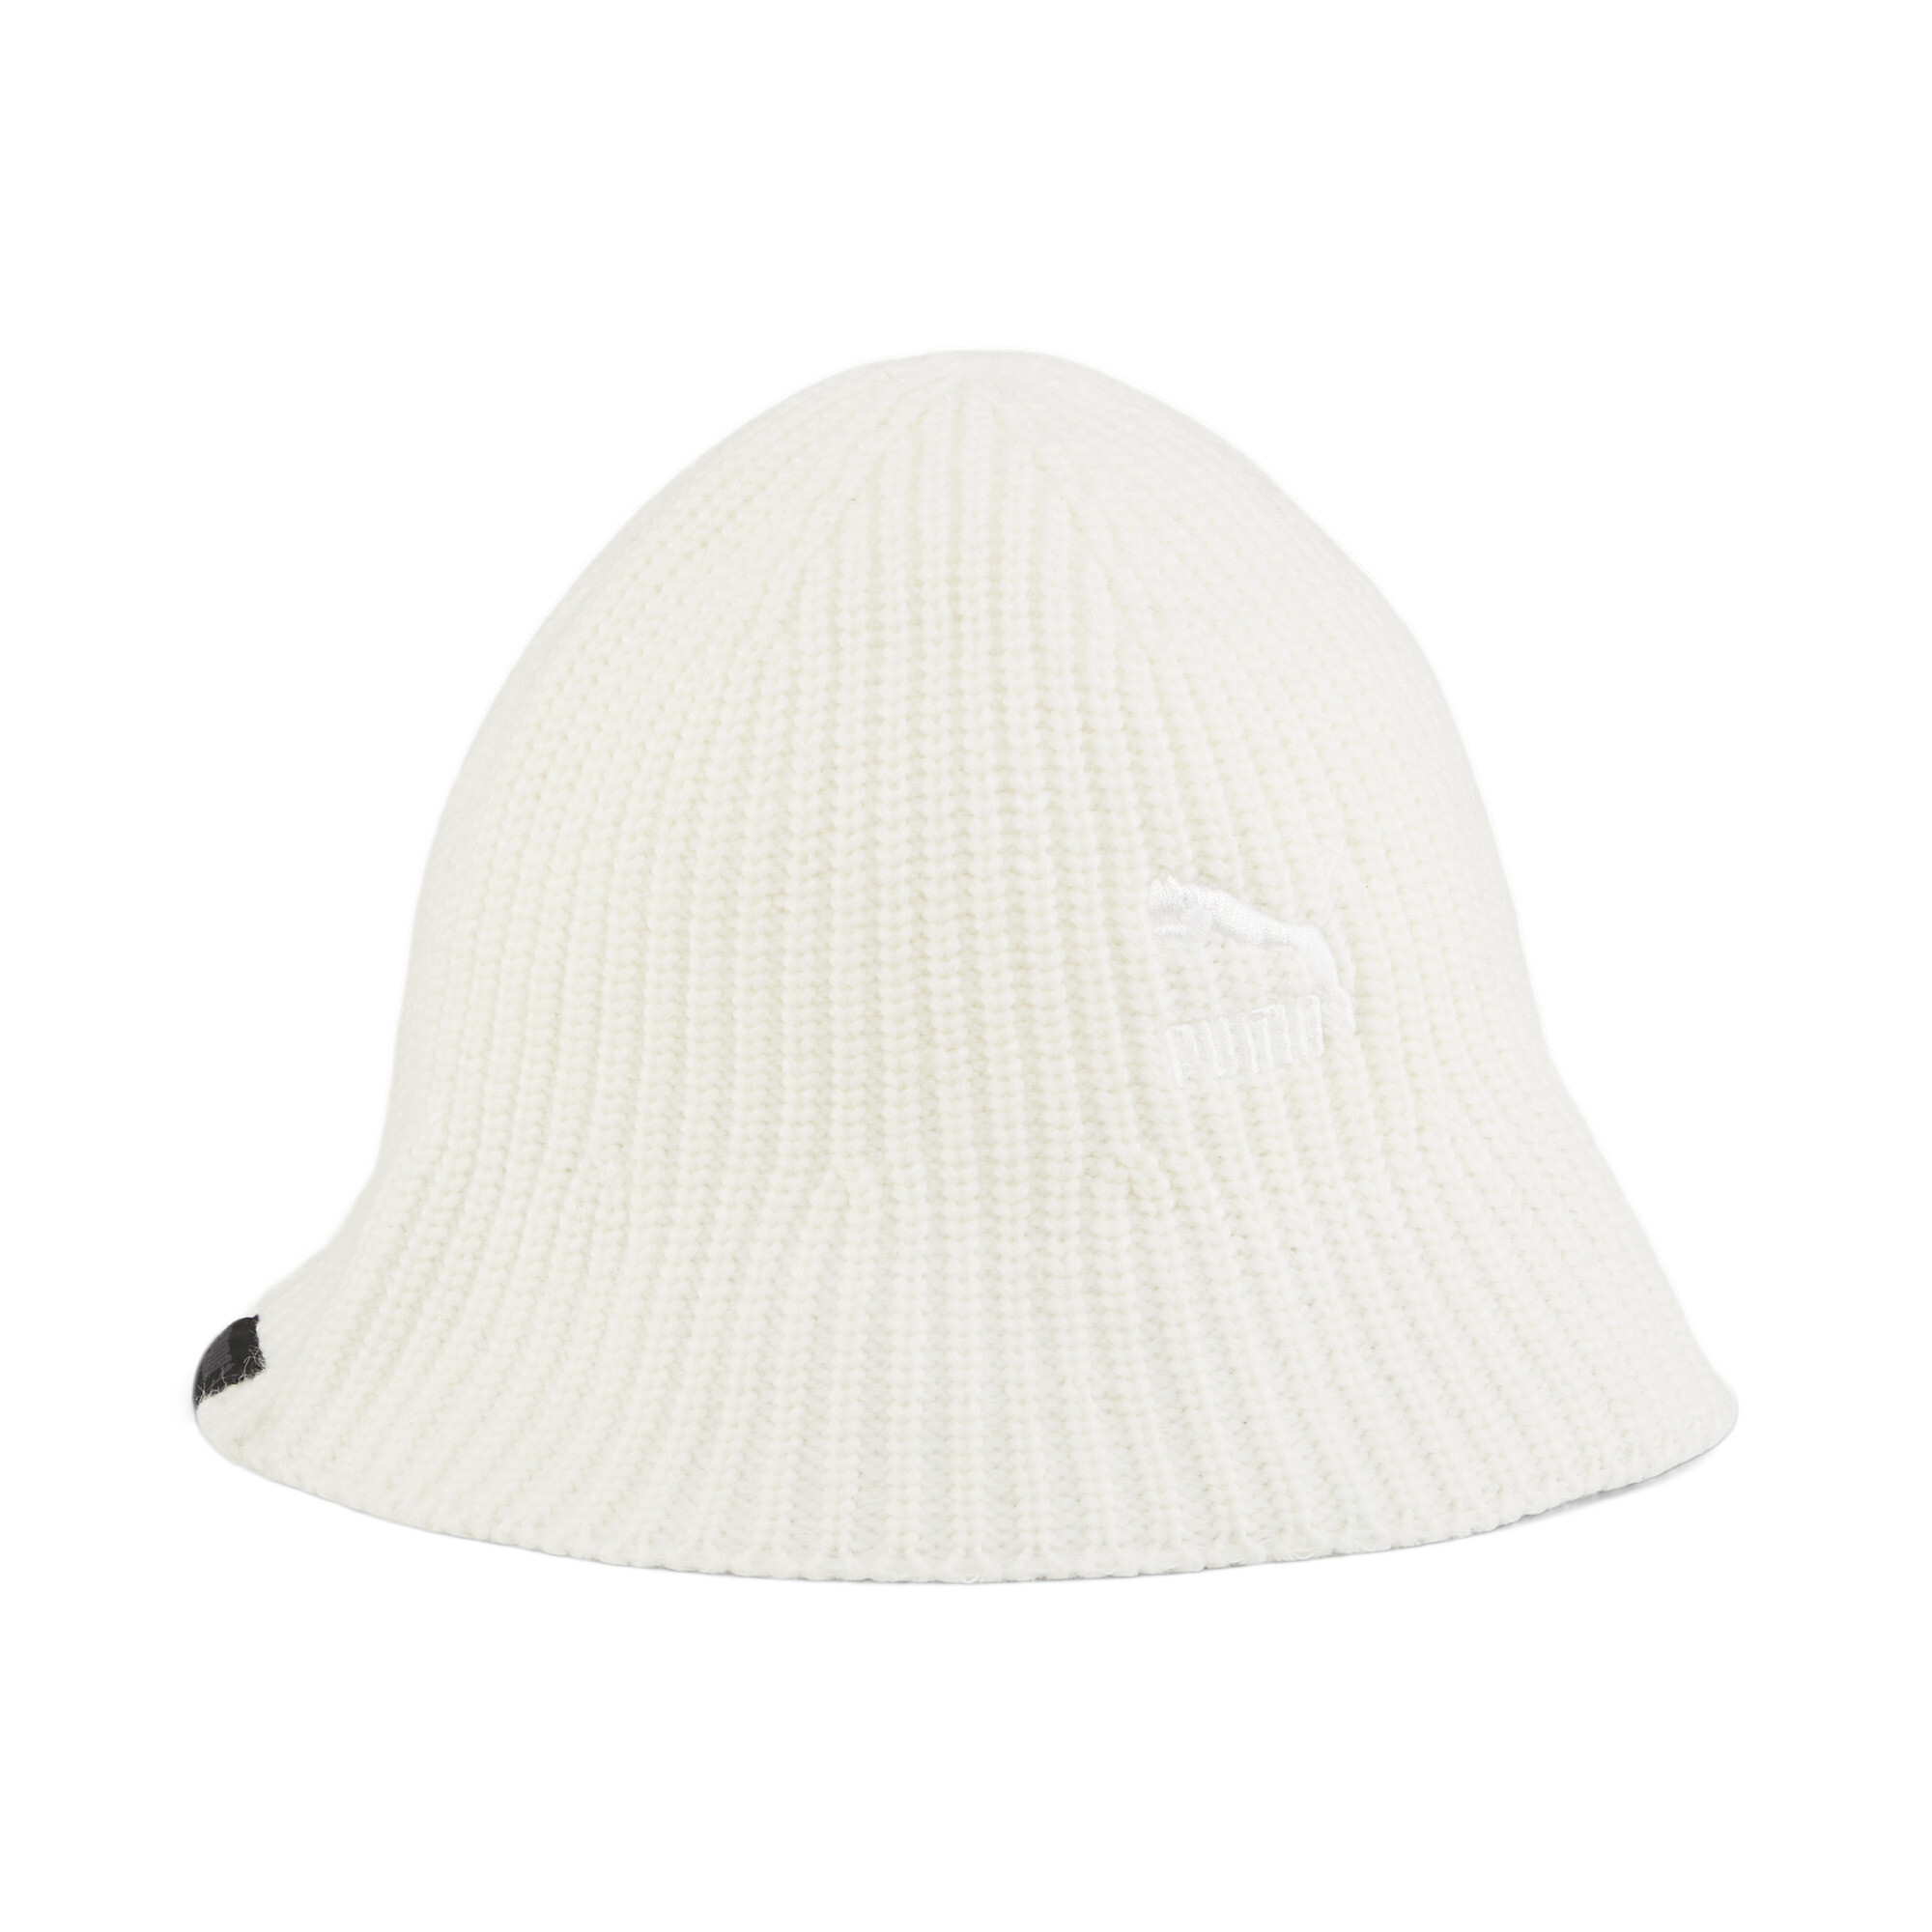 Puma PRIME Knitted Bucket Hat, White, Size L/XL, Accessories